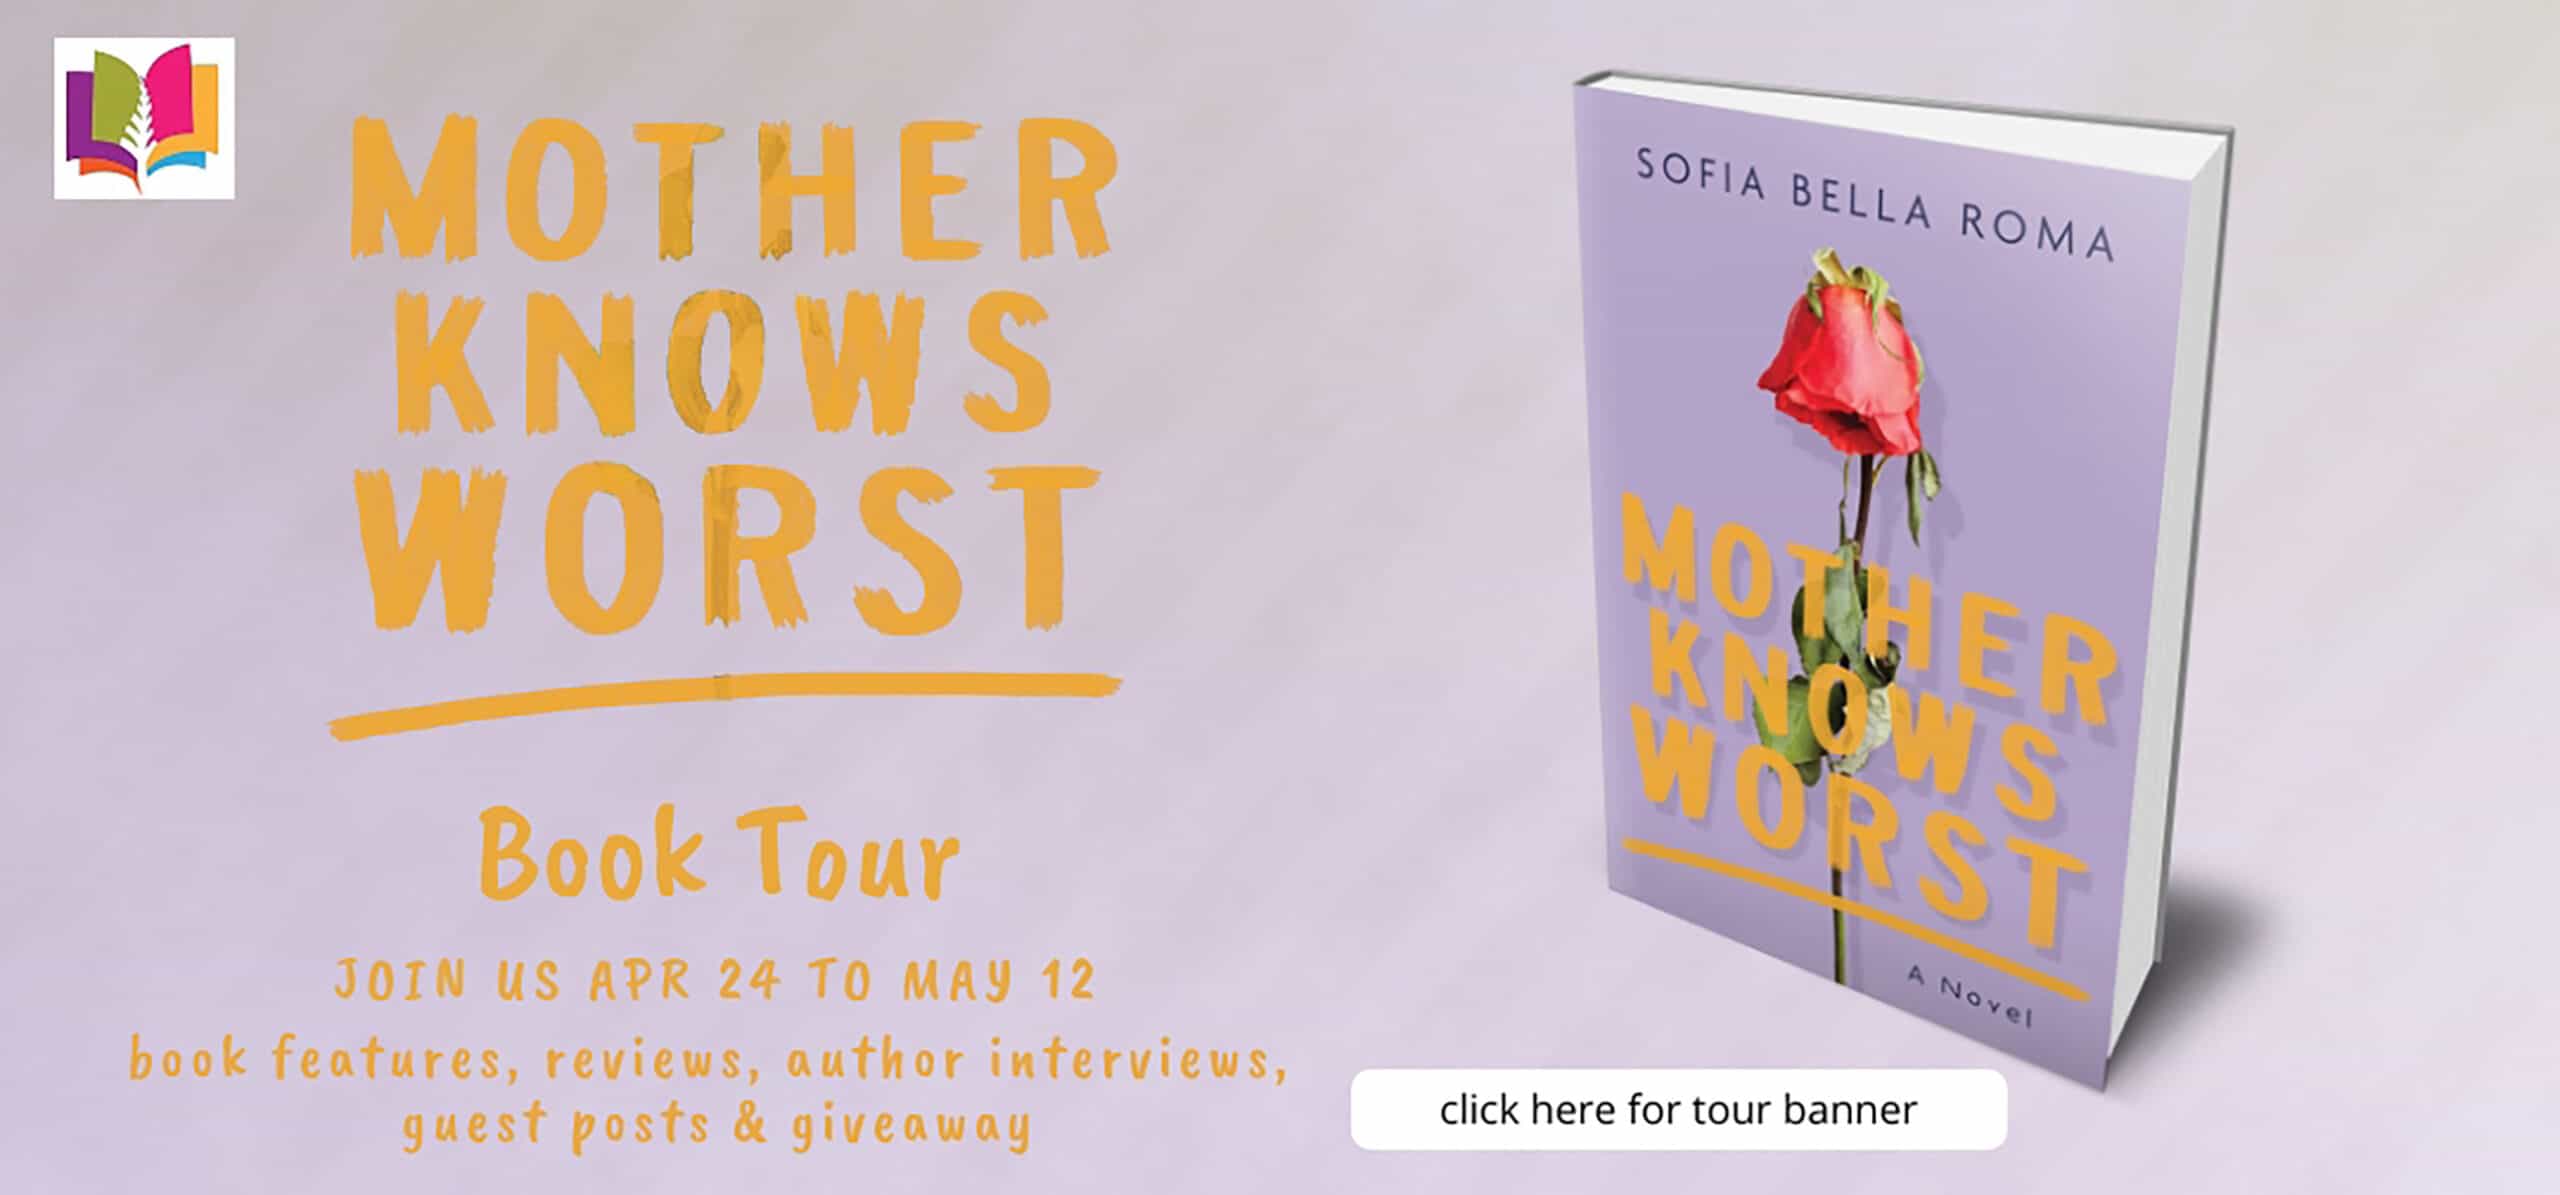 Guest Post from Sofia Bella Roma, Author of Mother Knows Worst. Book Review ~ 1 Signed Copy Available